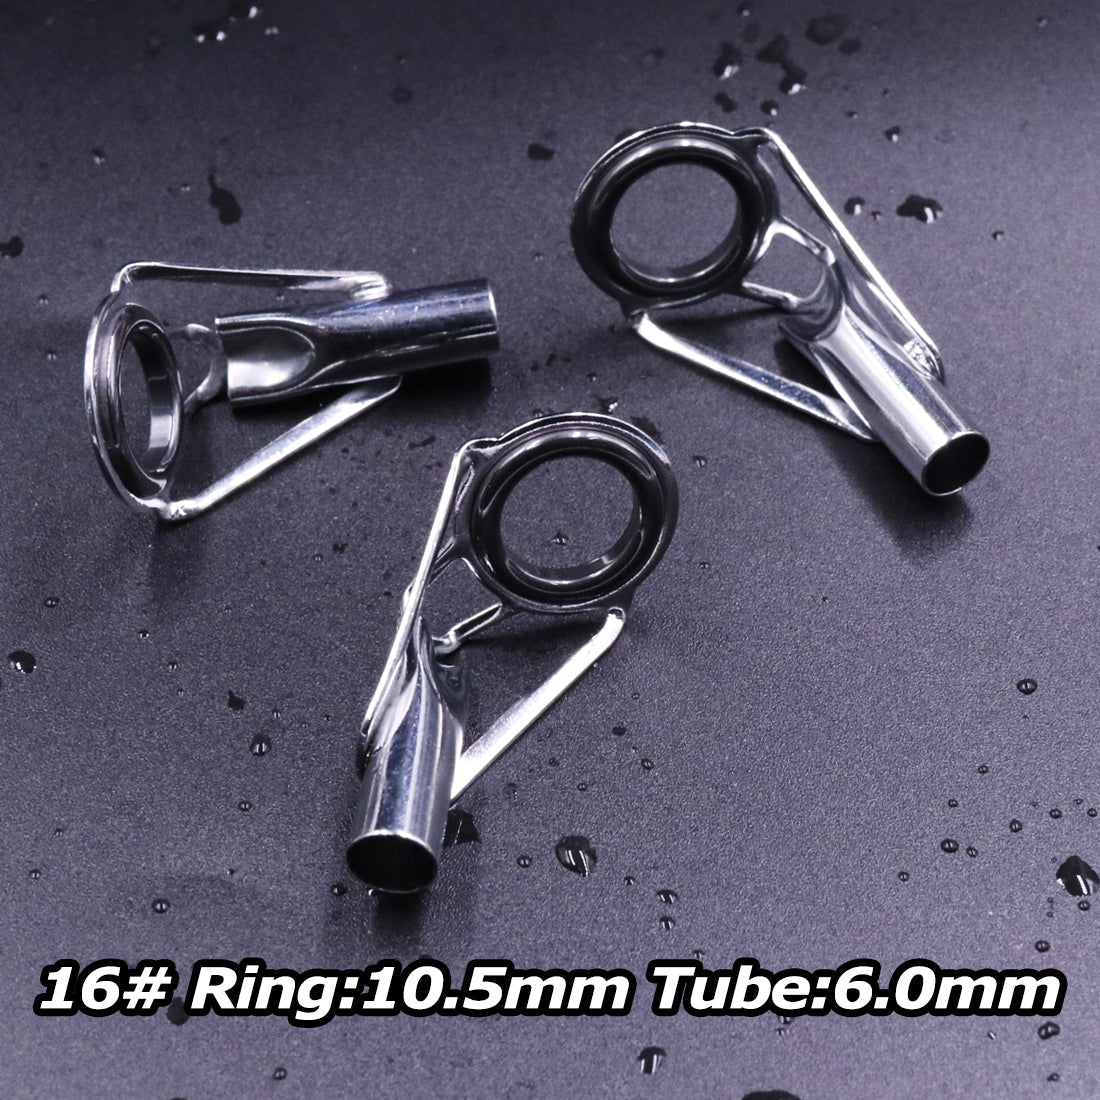 Silver 5Pcs Fishing Rod Tip Guides 1.6mm-3.2mm